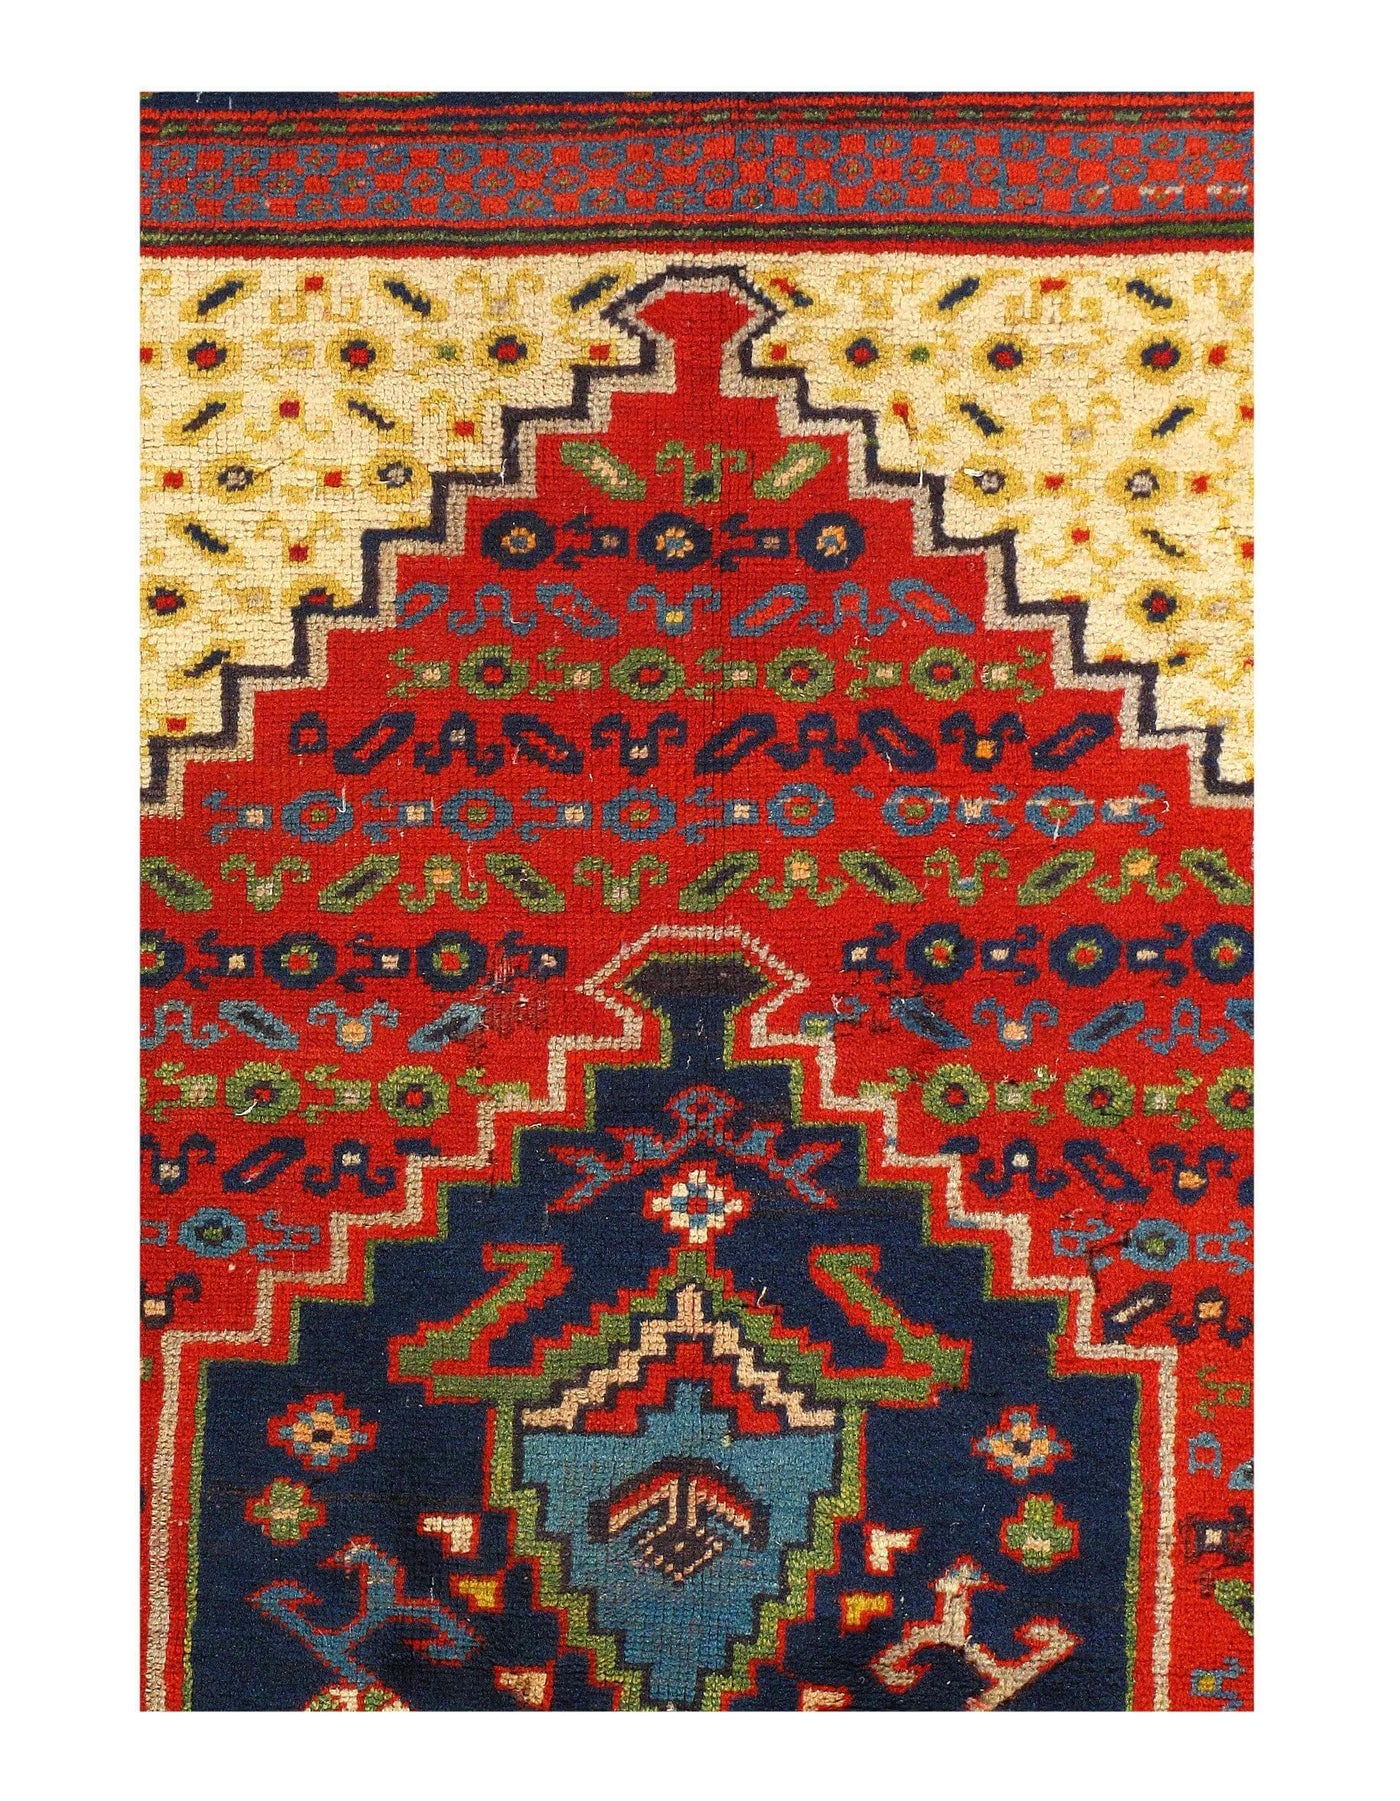 Canvello 1970s Vintage Persian Hand Knotted Rugs - 4'4" X 6'4"